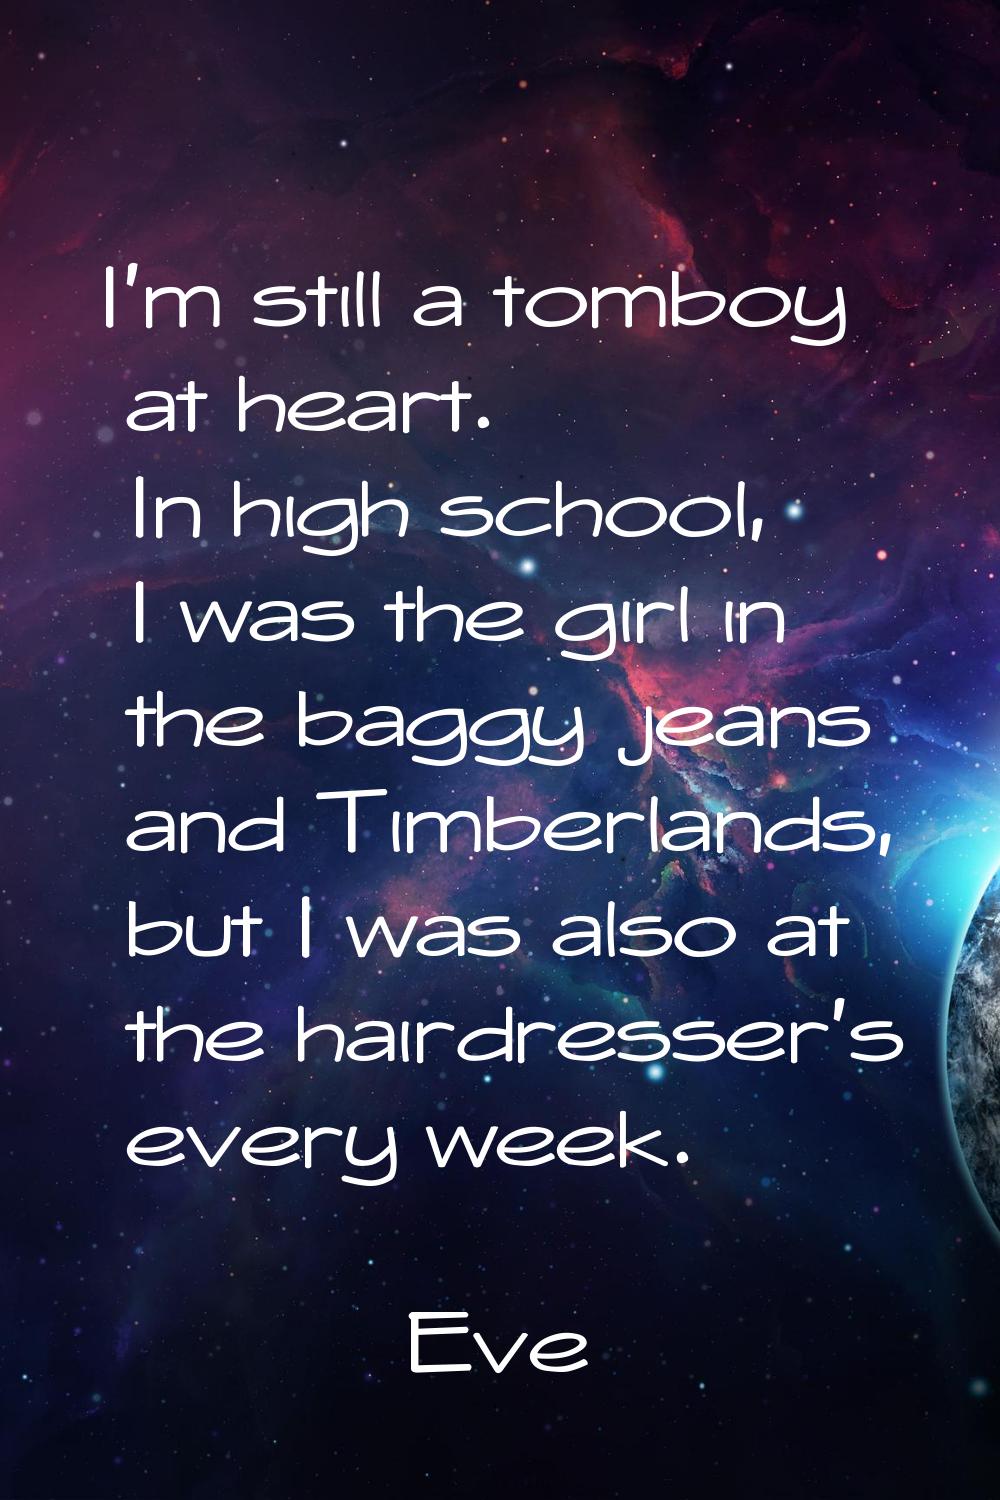 I'm still a tomboy at heart. In high school, I was the girl in the baggy jeans and Timberlands, but